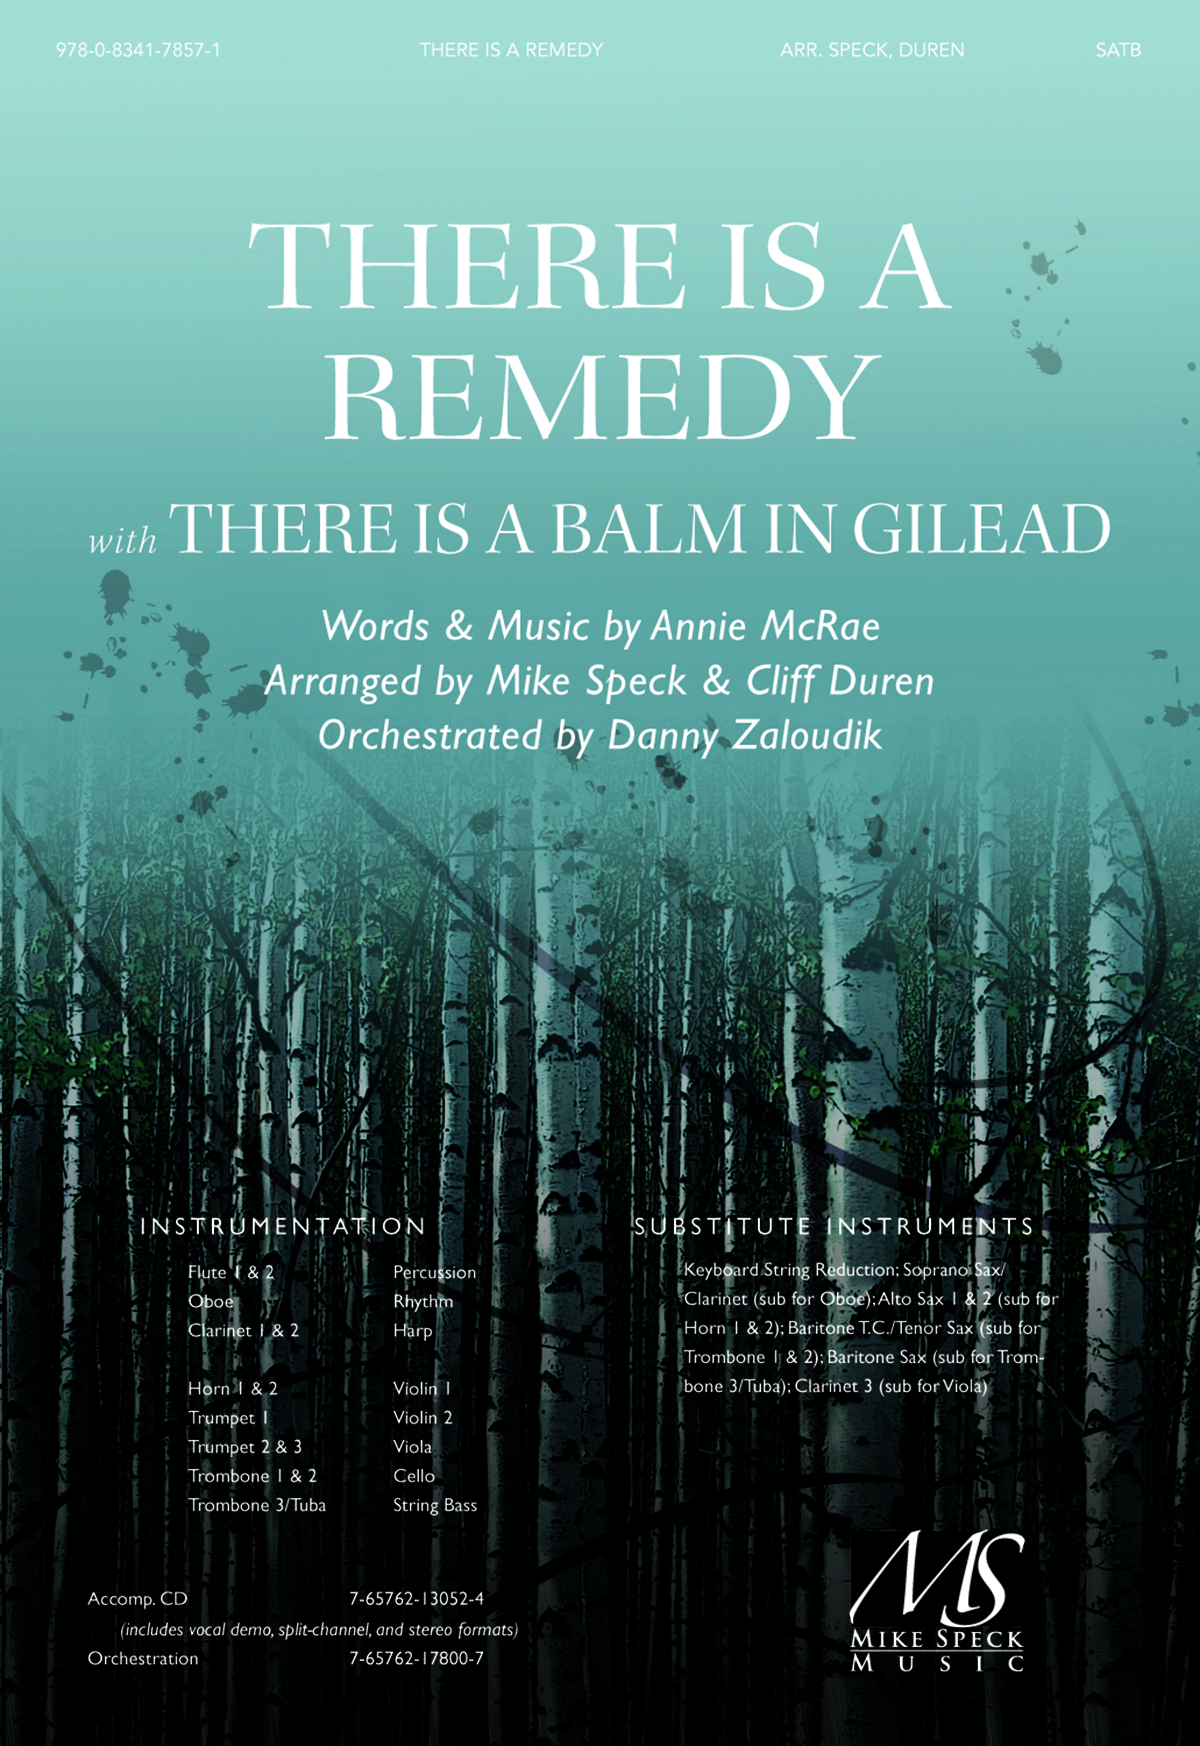 There Is a Remedy with There Is a Balm in Gilead